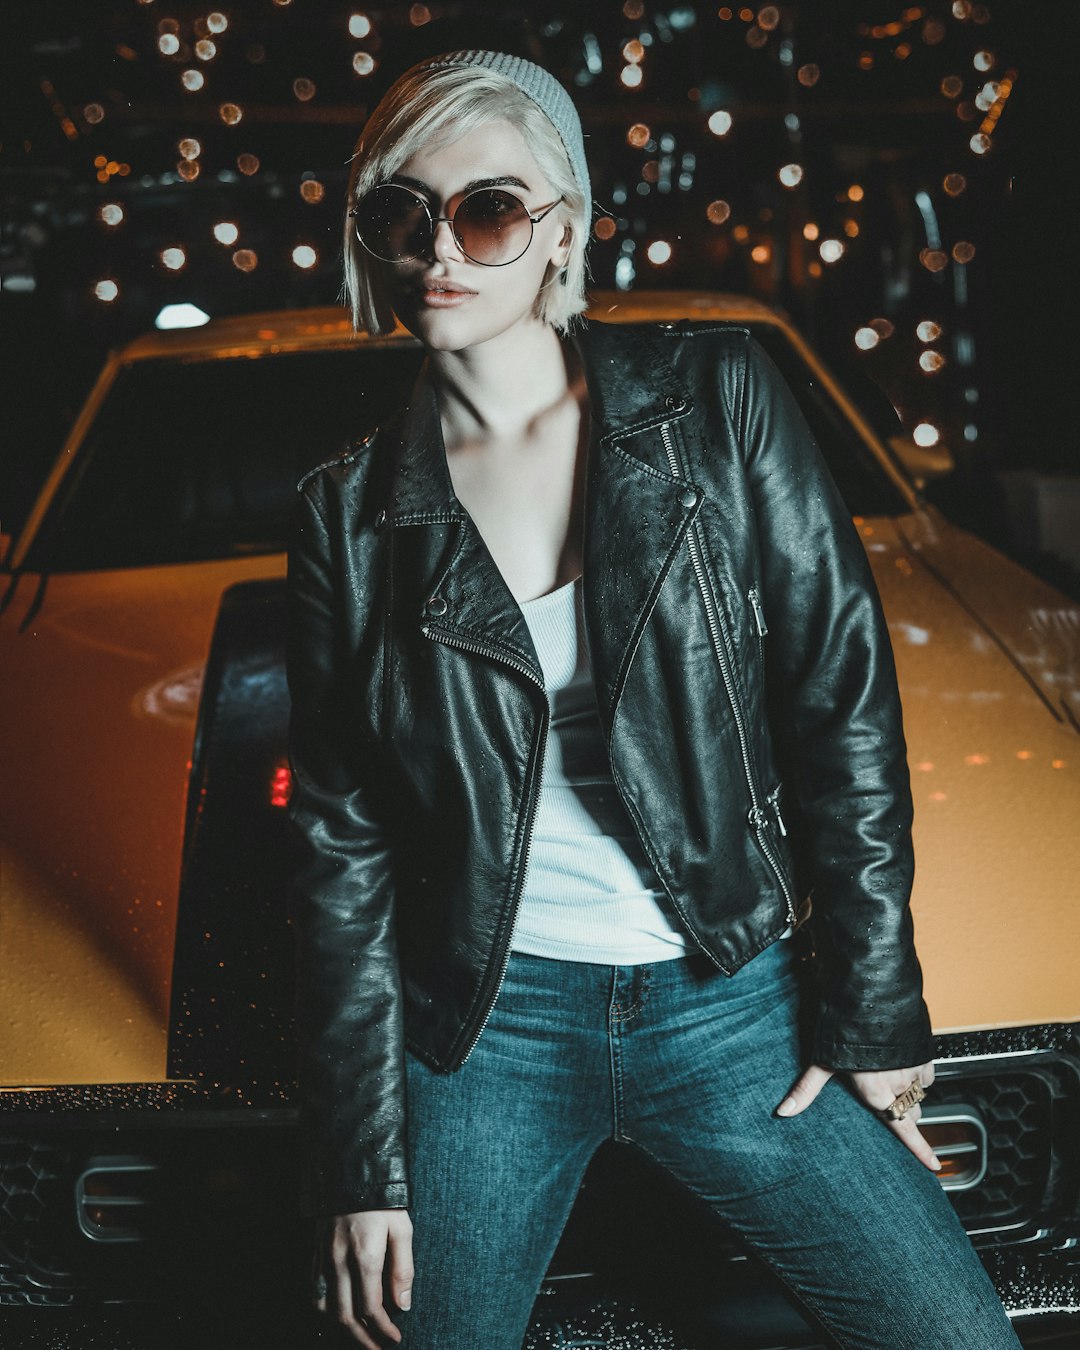 woman in black leather jacket and blue denim jeans wearing black sunglasses